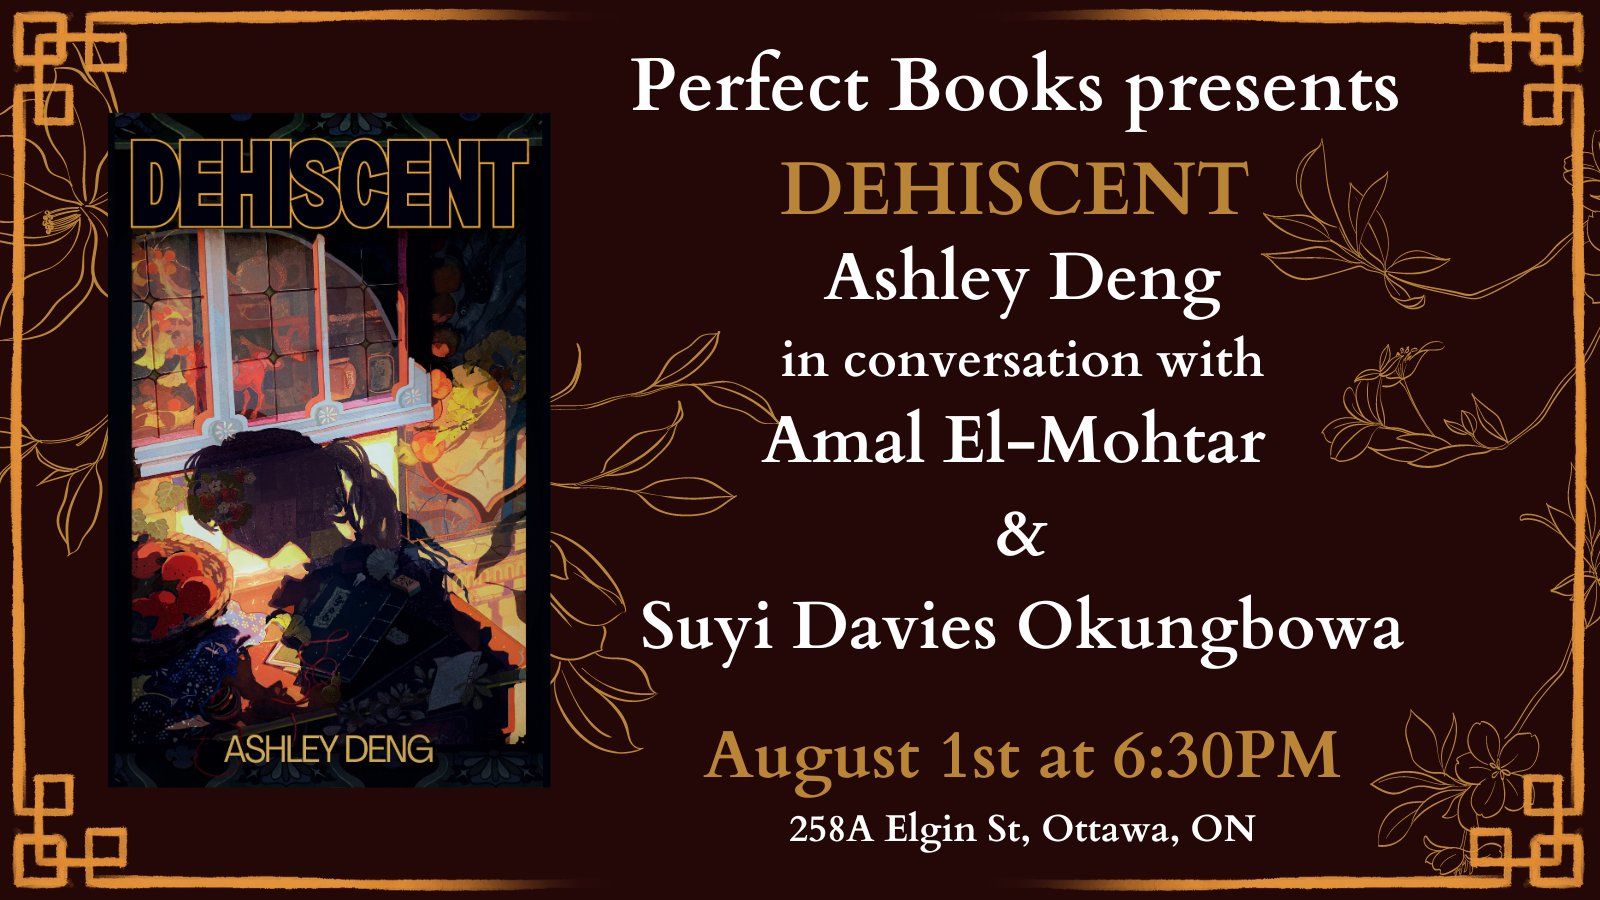 Promotional graphic for the launch of DEHISCENT, a book by Ashley Deng. A pale brown geometric border surrounds a maroon background with images of flowers and leaves, on top of which is the cover of DEHISCENT to the left, depicting the shadow of a feminine figure with a long ponytail against the façade of a colourful house. To the right of it are the words "Perfect Books presents DEHSICENT, Ashley Deng in conversation with Amal El-Mohtar and Suyi Davies Okungbowa, August 1st at 6:30 PM, 258A Elgin St, Ottawa, ON.